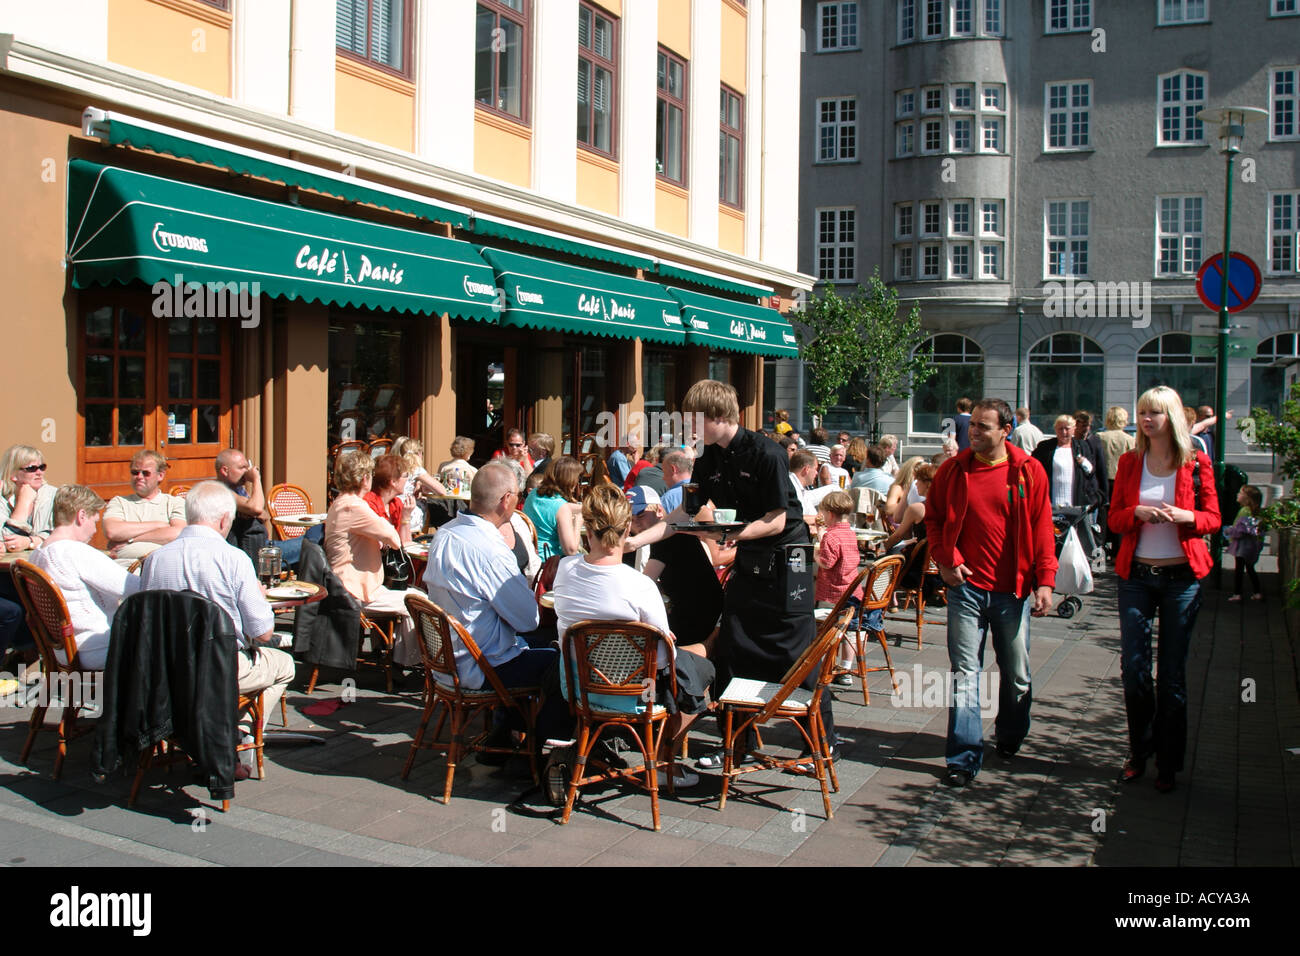 Iceland Reykjavik center Cafe Paris outdoor terasse in summer crowded people Stock Photo